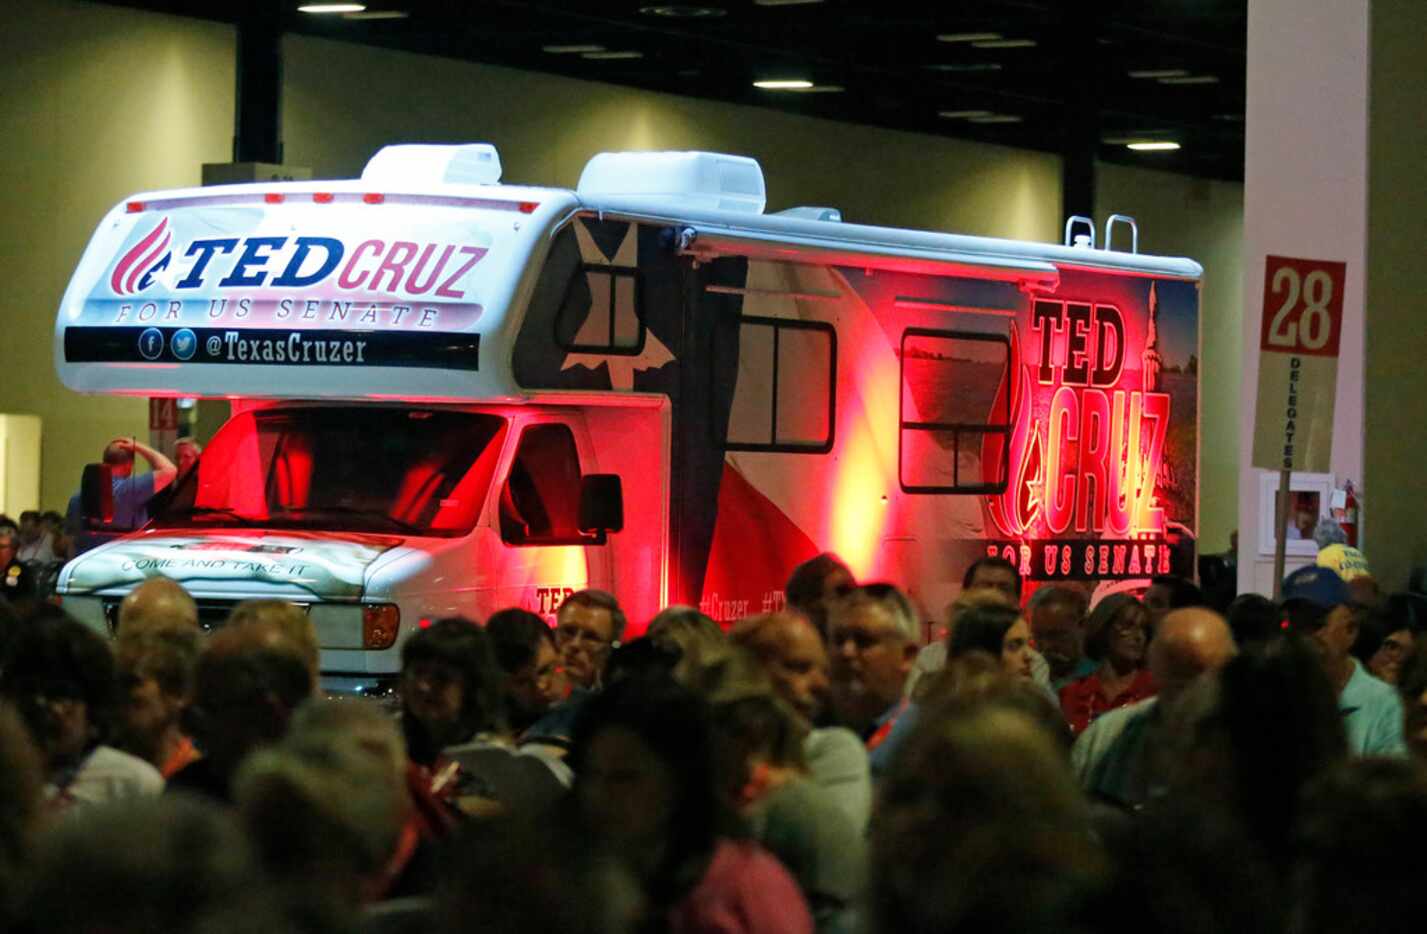 Sen. Ted Cruz's "Texas Cruzer" is parked inside the main session hall at the 2018 Texas GOP...